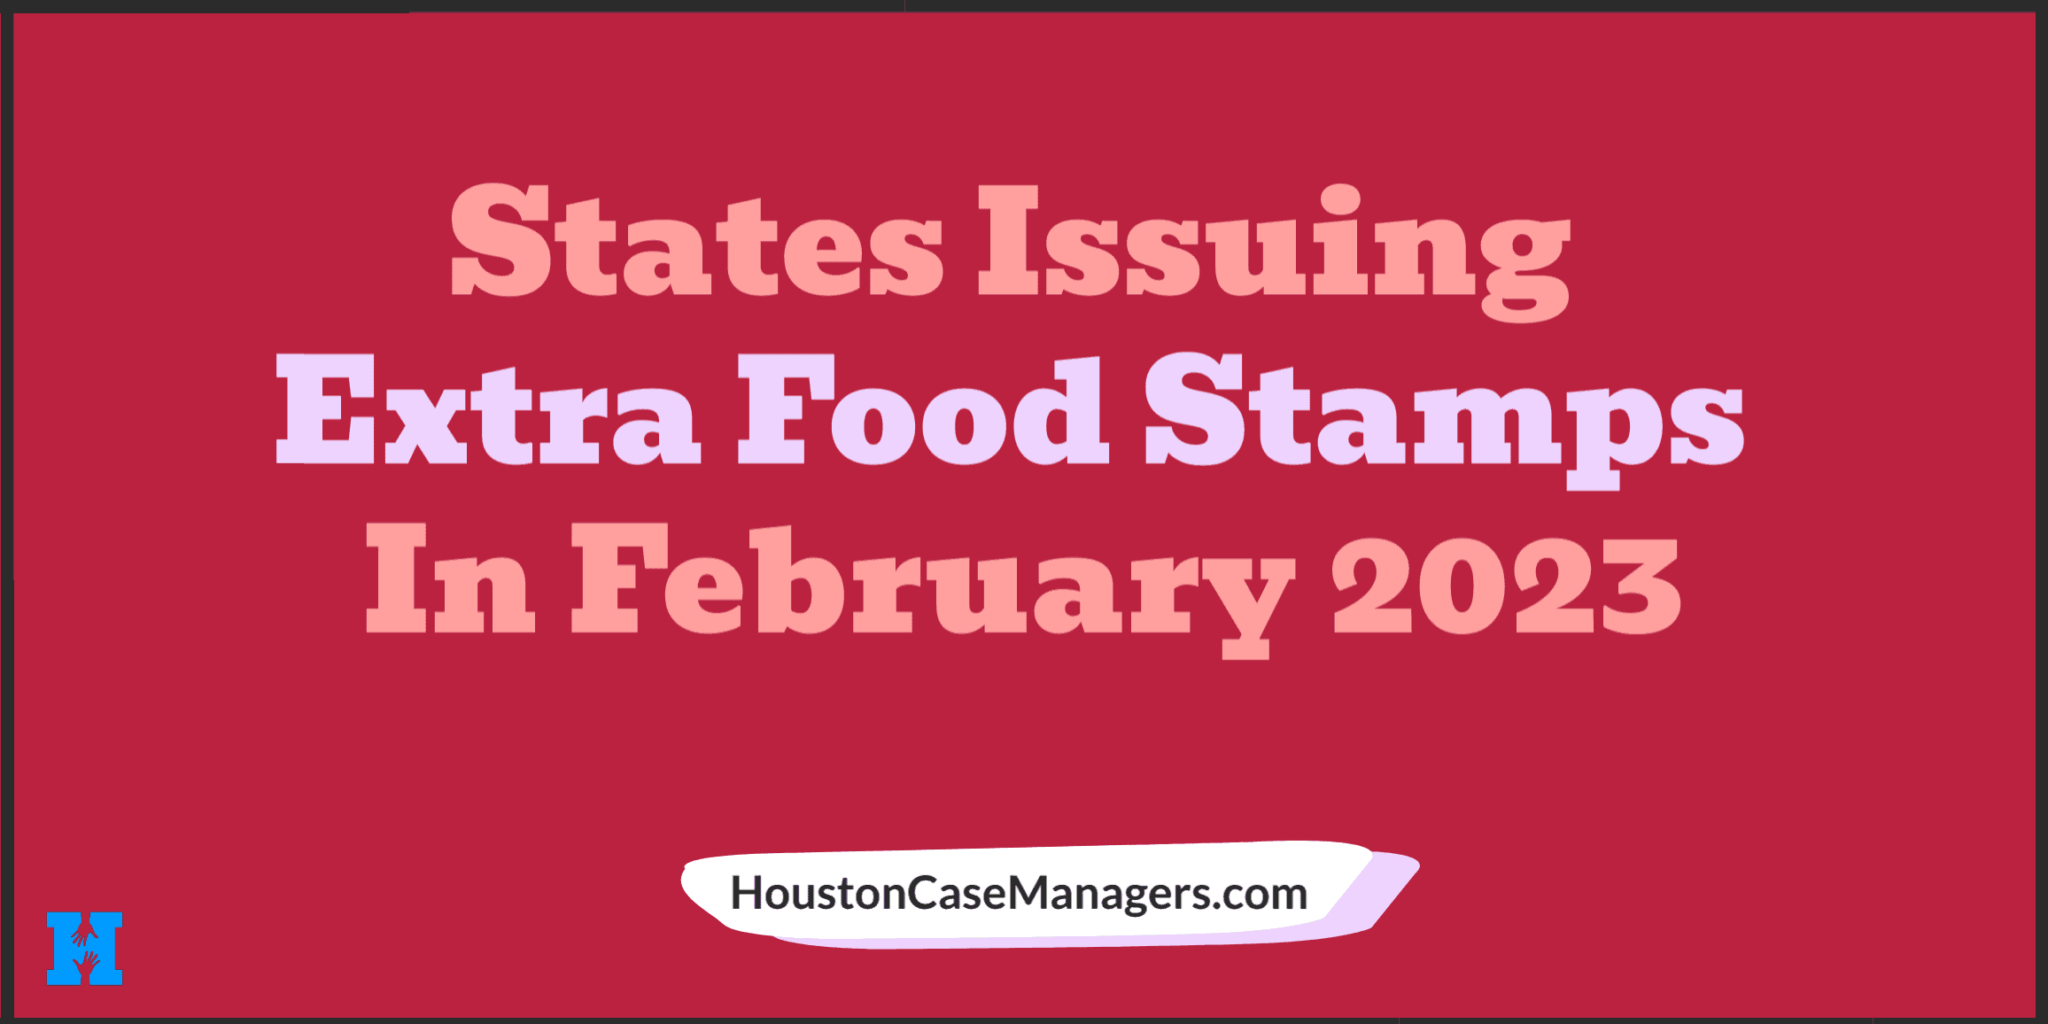 19 States Issuing Extra Food Stamps In February 2023